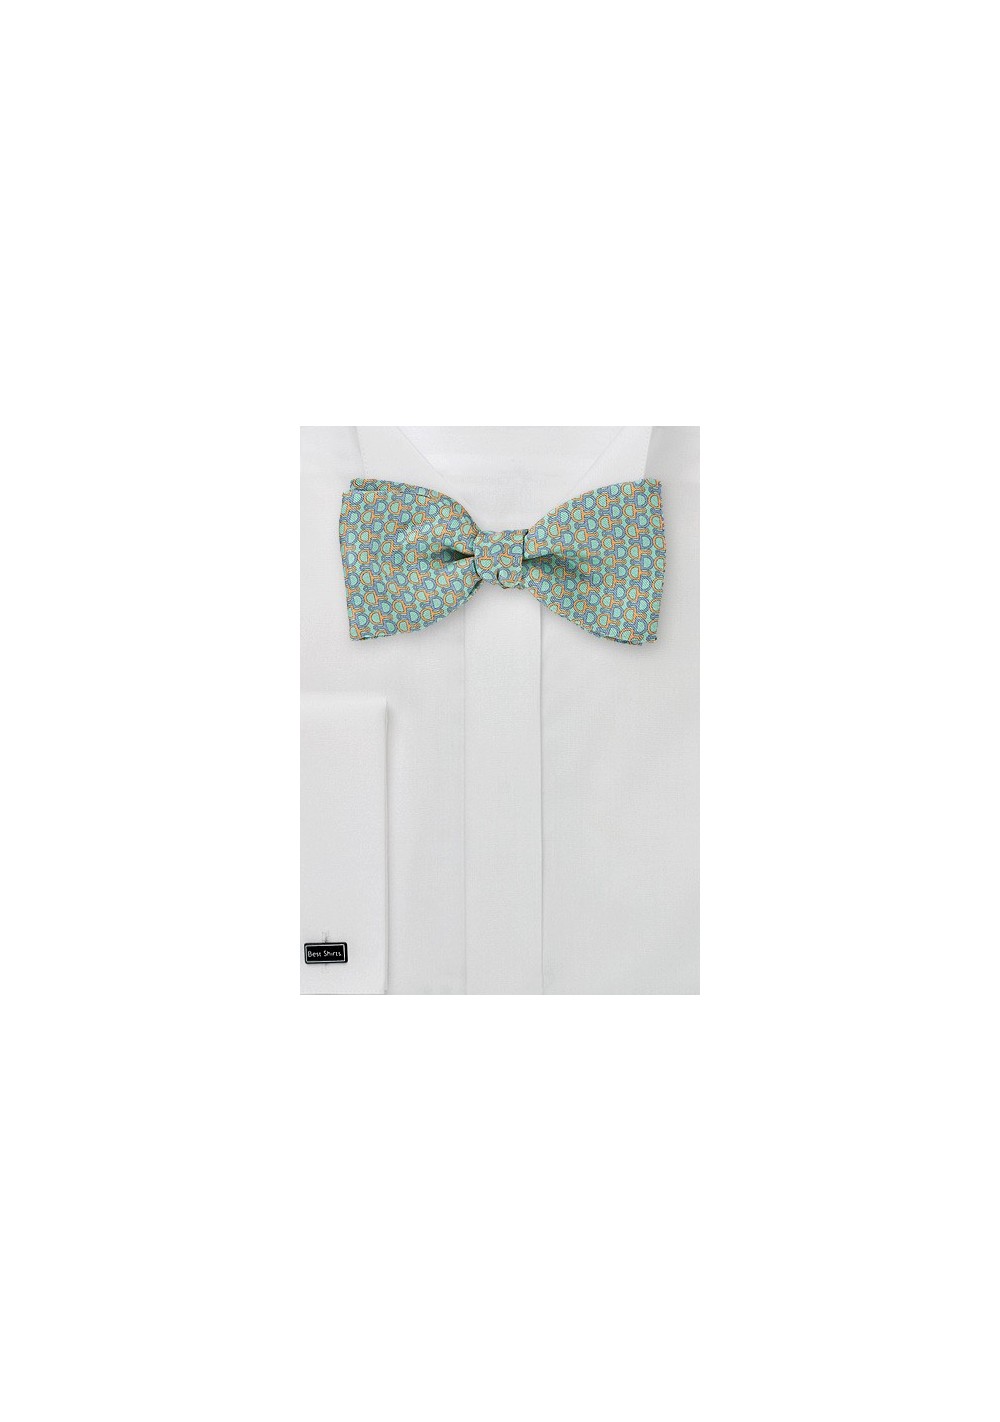 Turquoise Bowtie with Orange and Blue Pattern